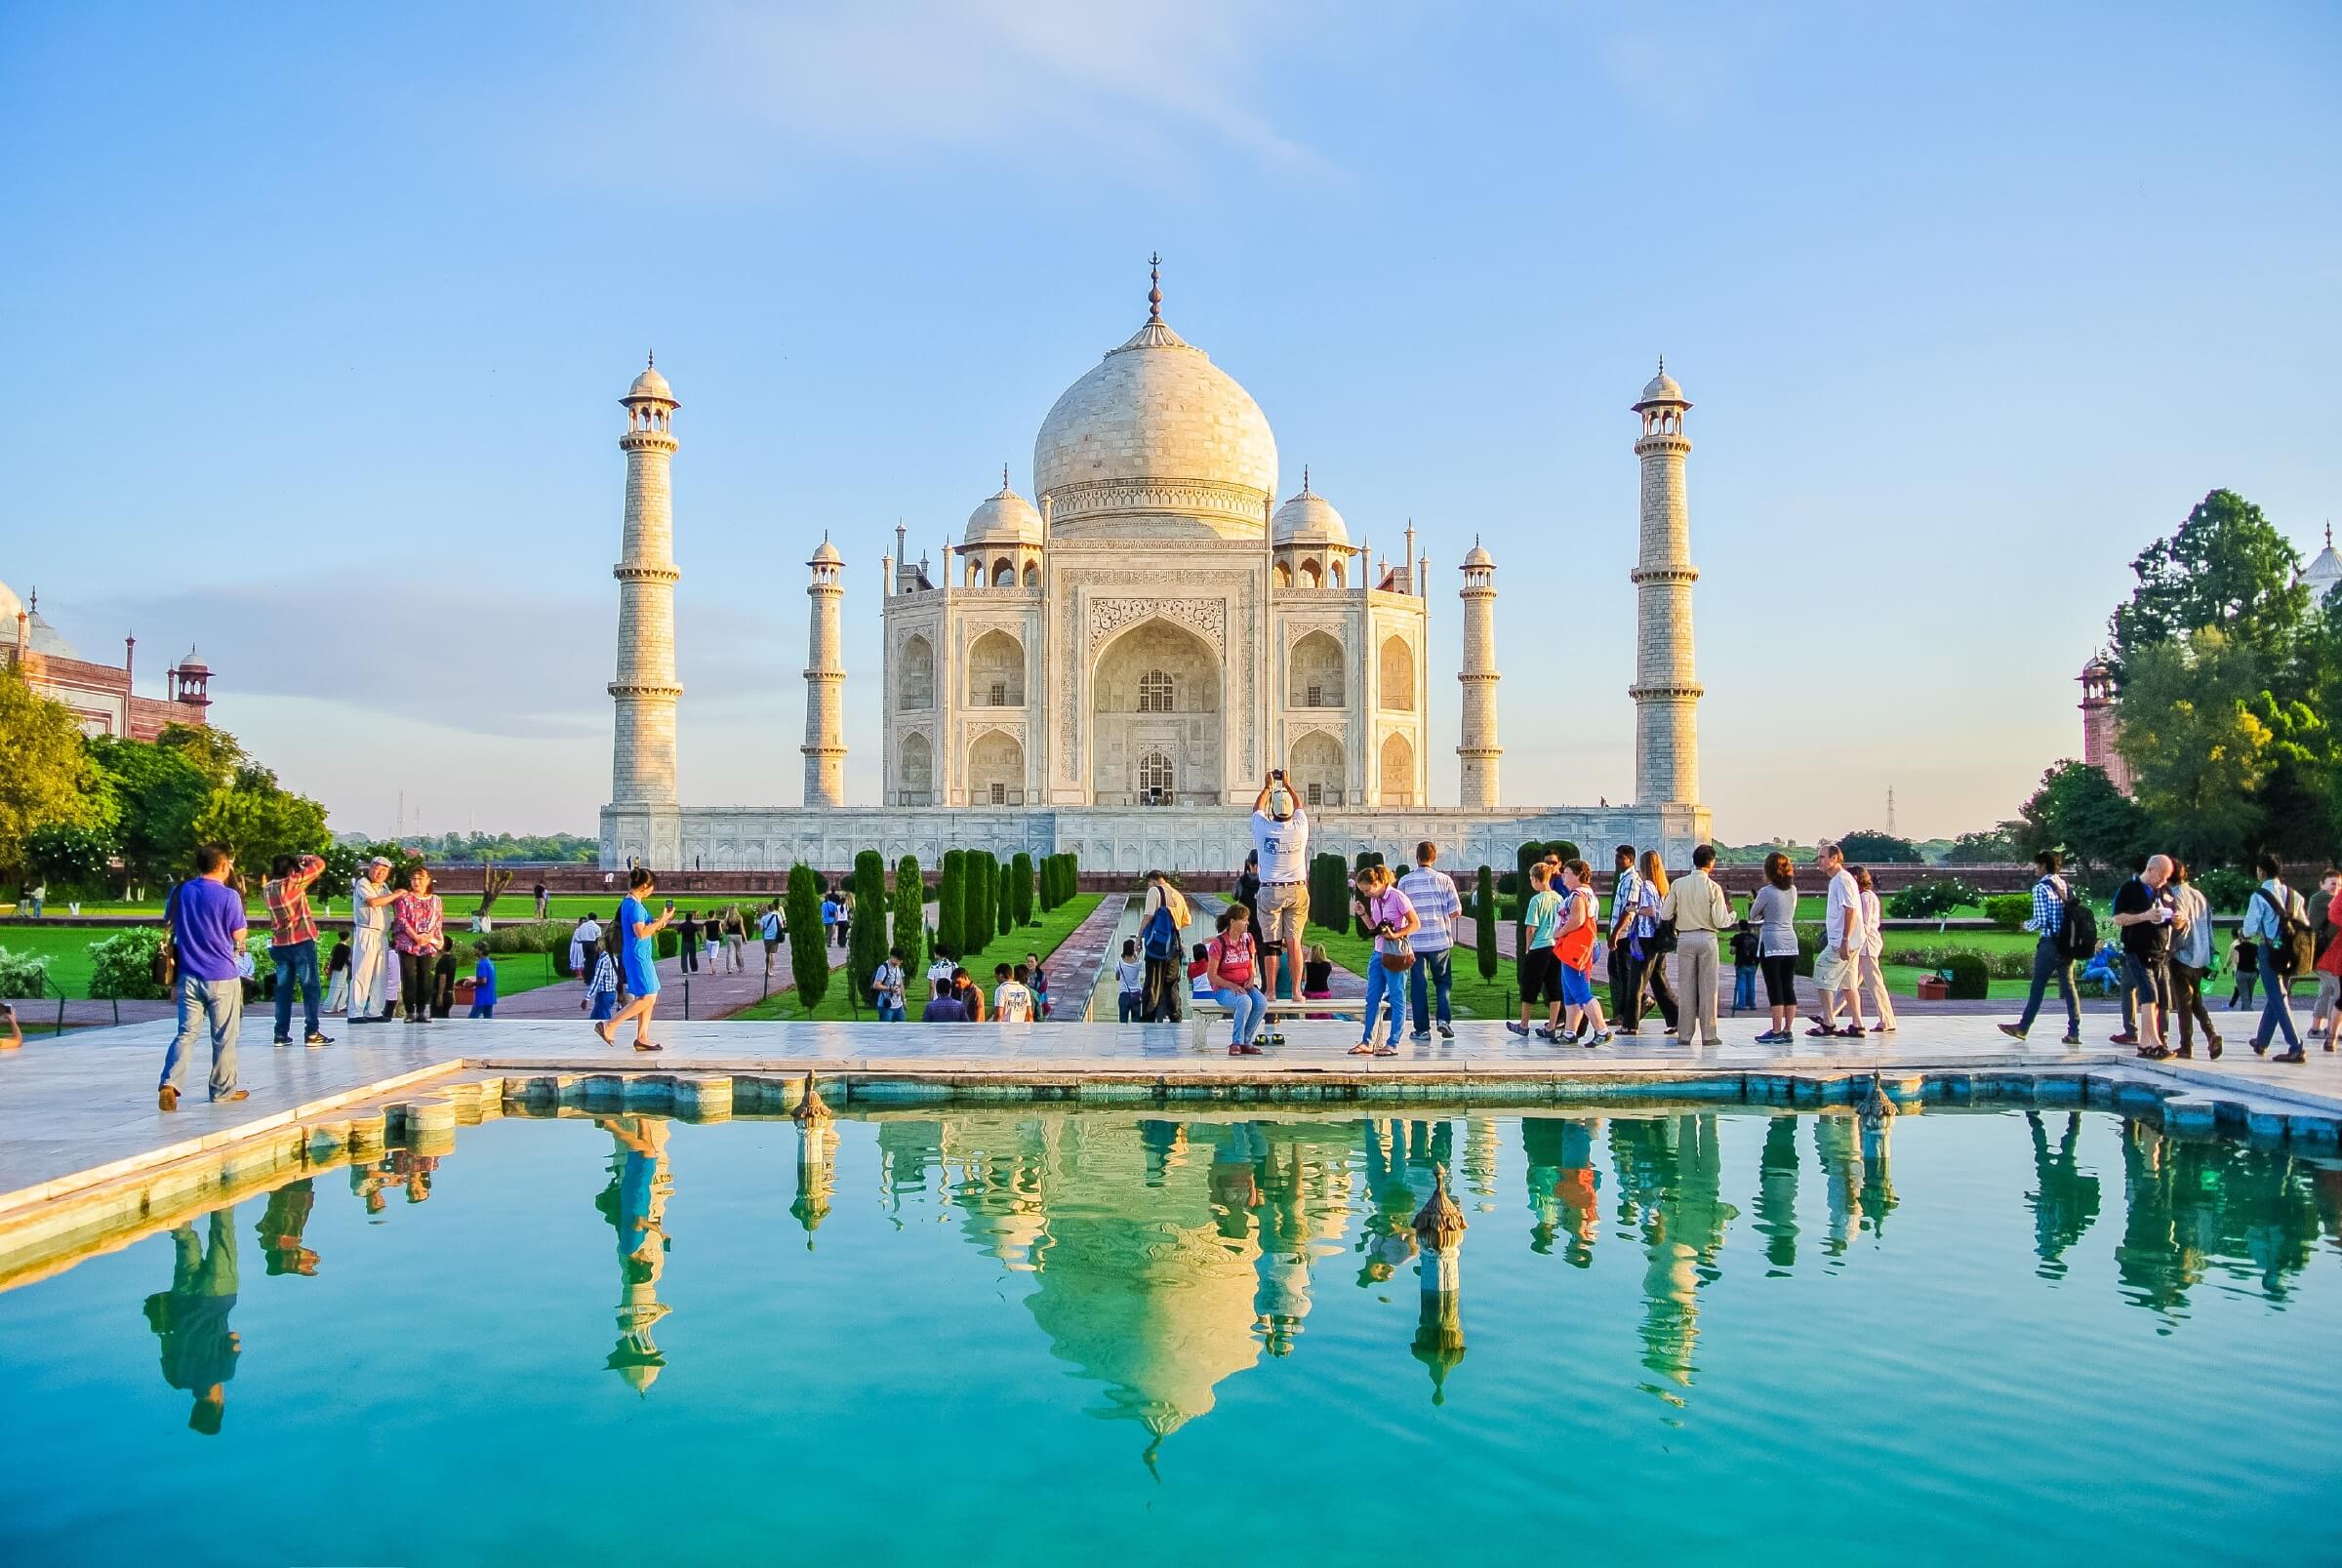 Visiting Taj Mahal? Pay a fine if you spend over 3 hours